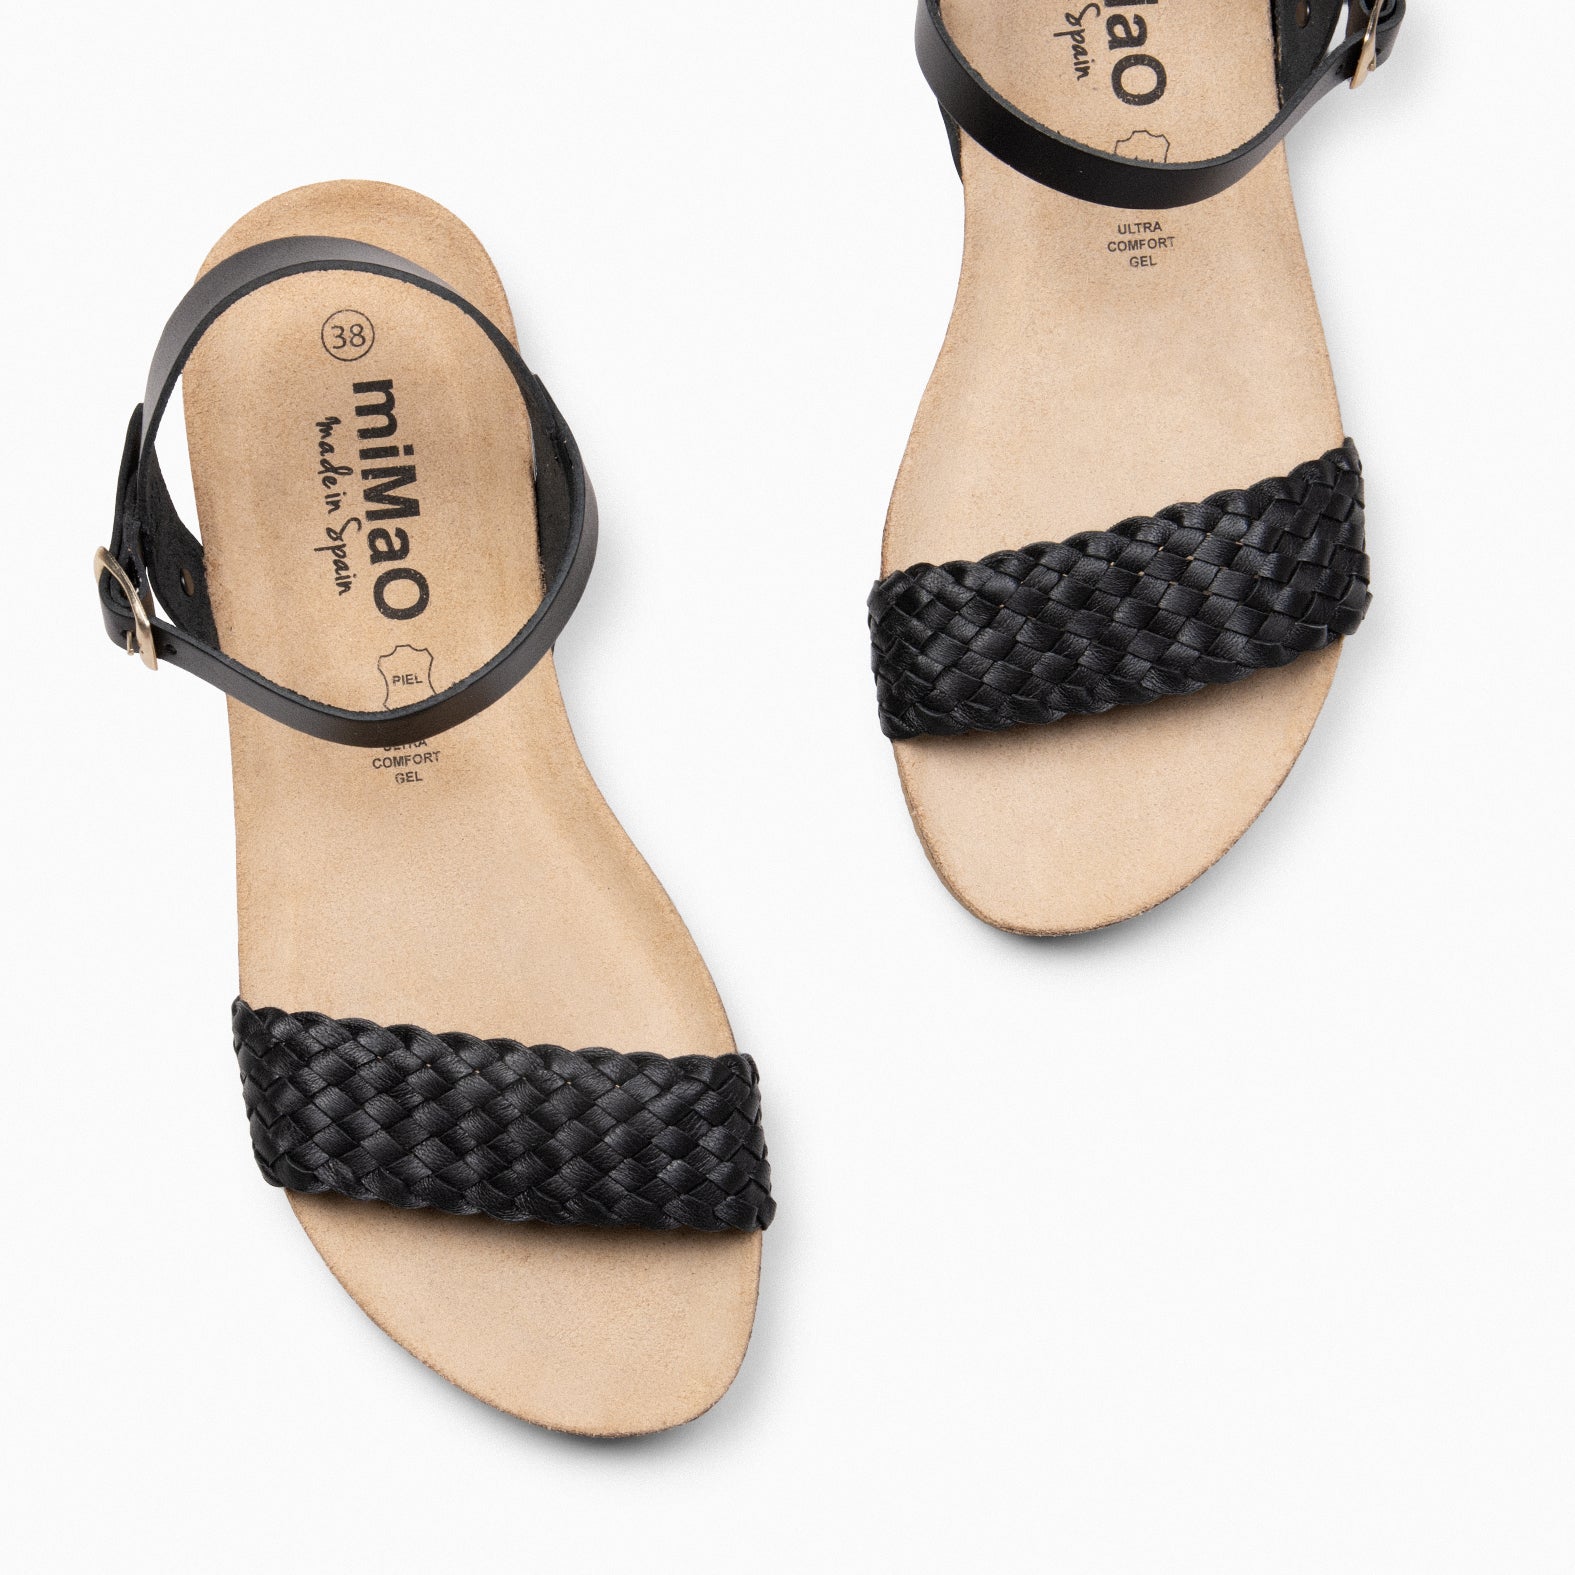 AIRE - BLACK BIO Flat Sandals with braided strap